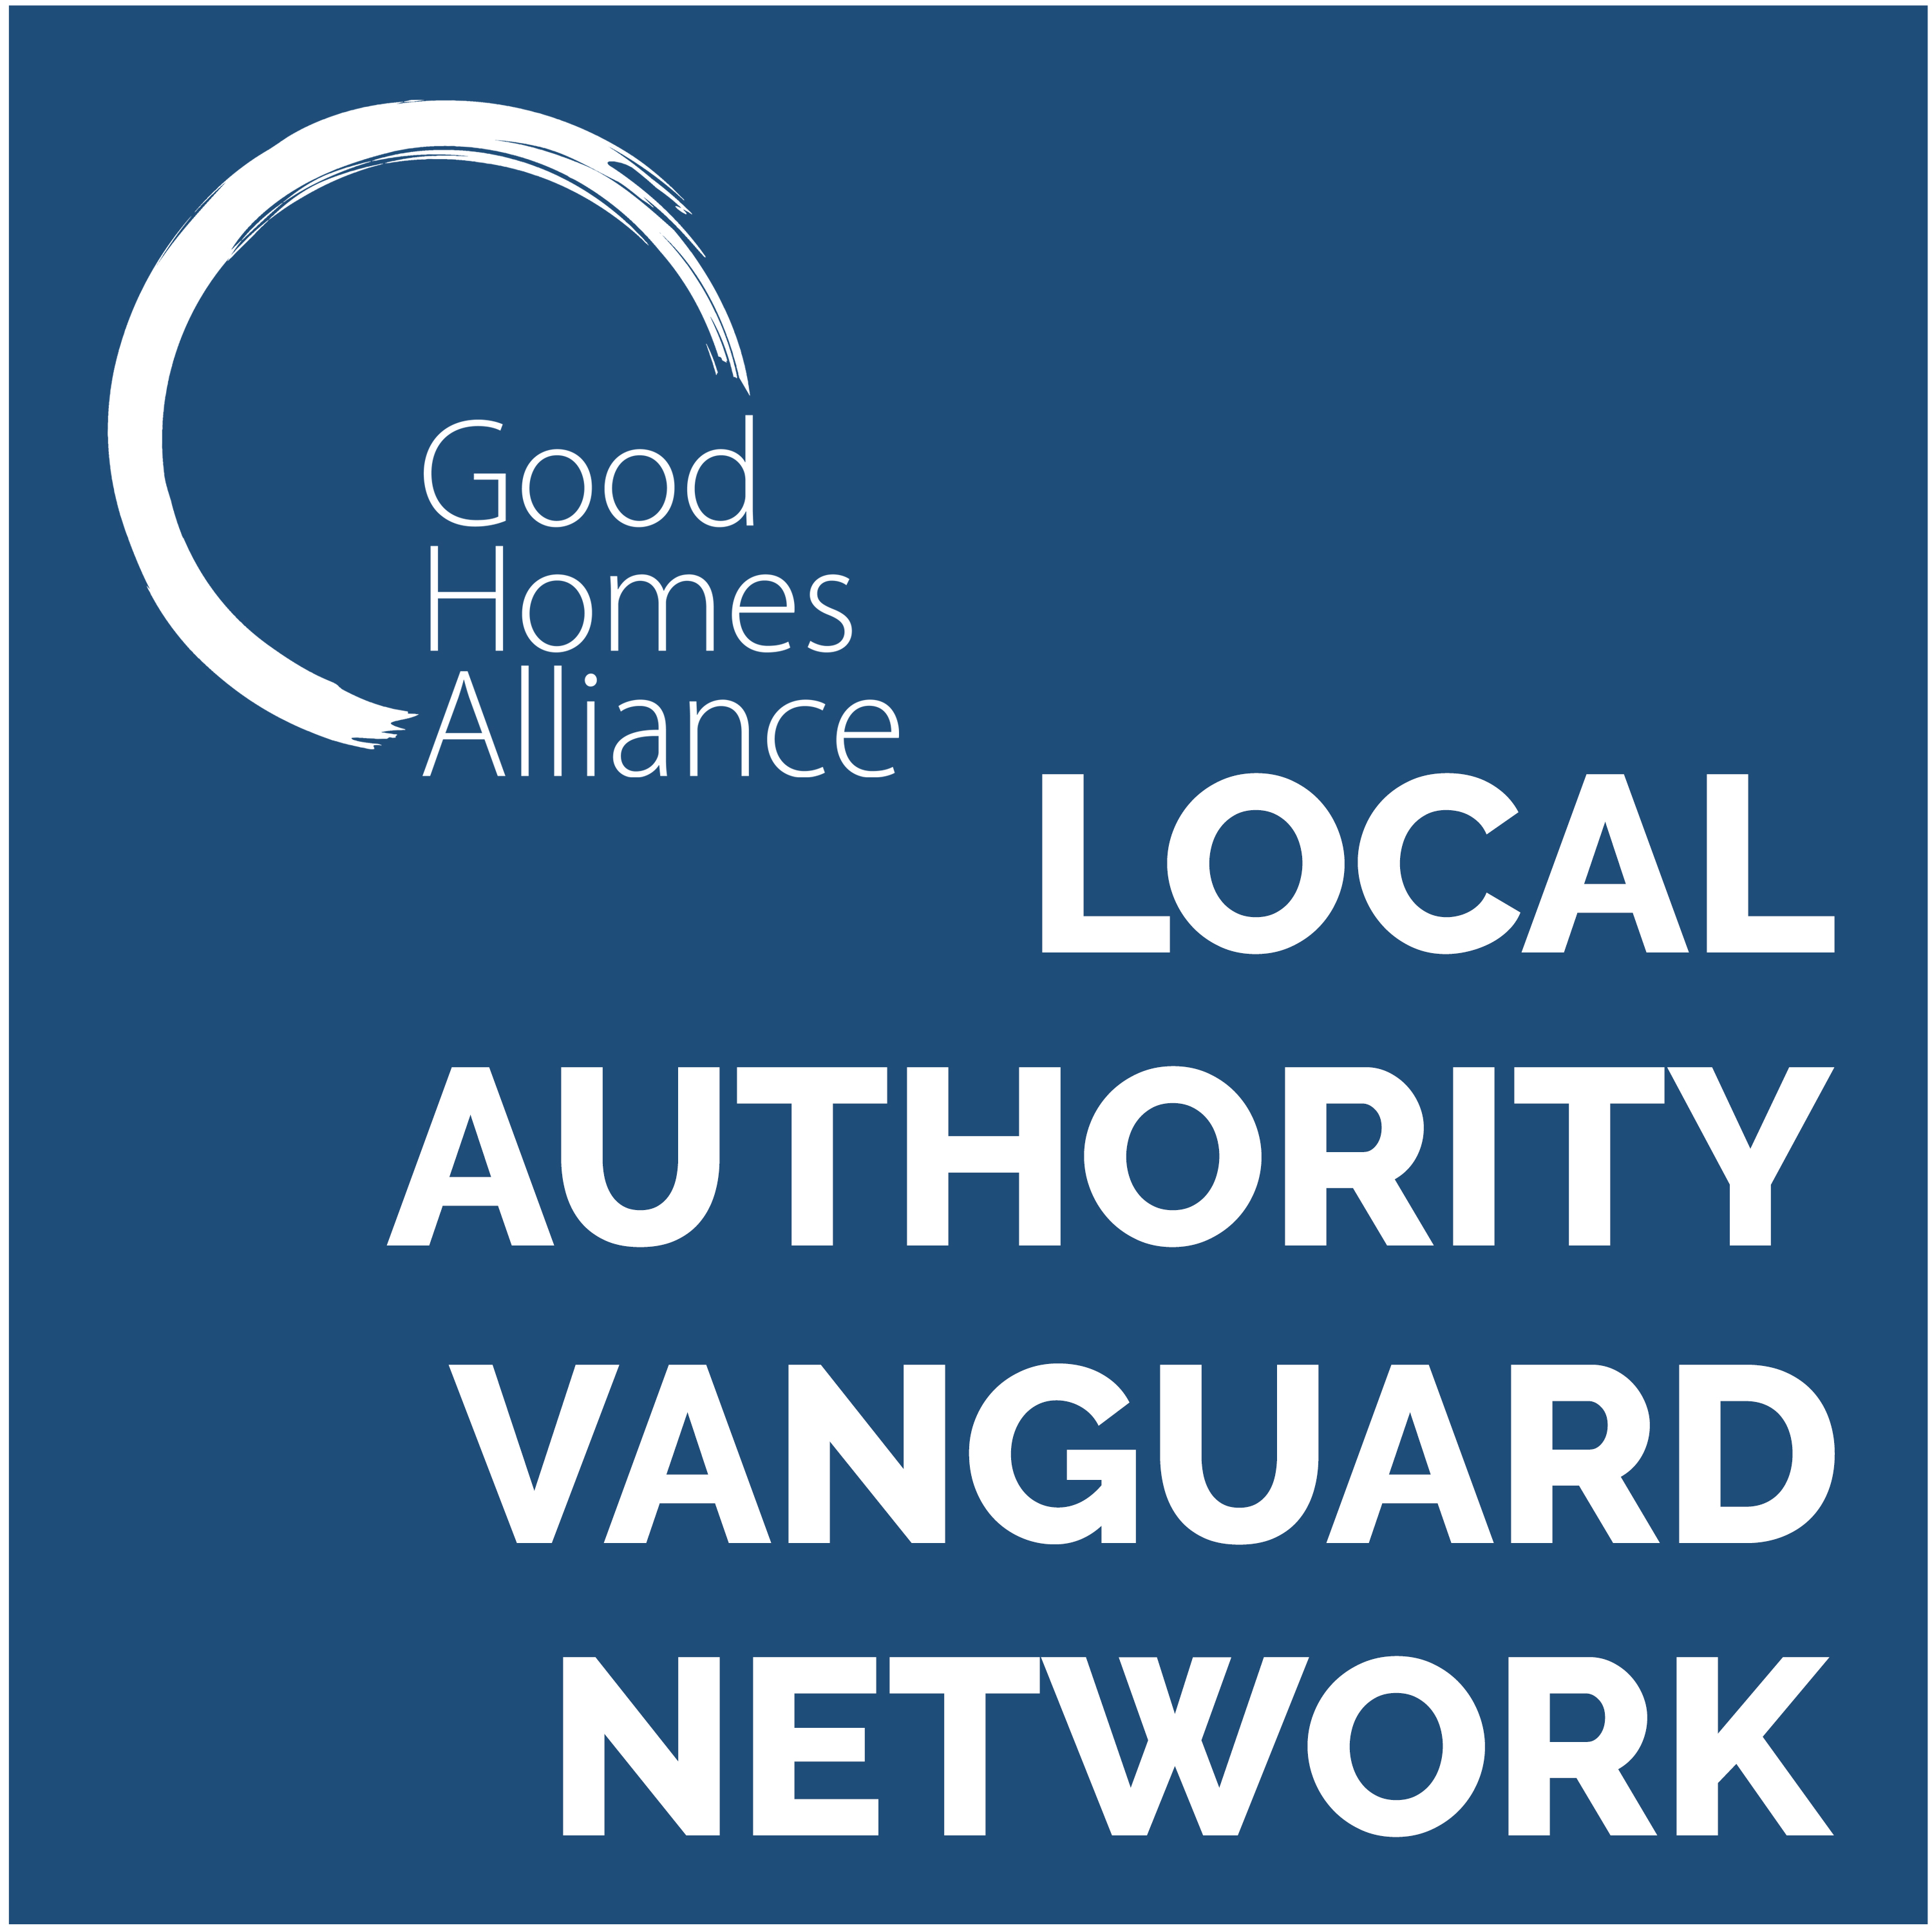 Good Homes Alliance launch new local authority network